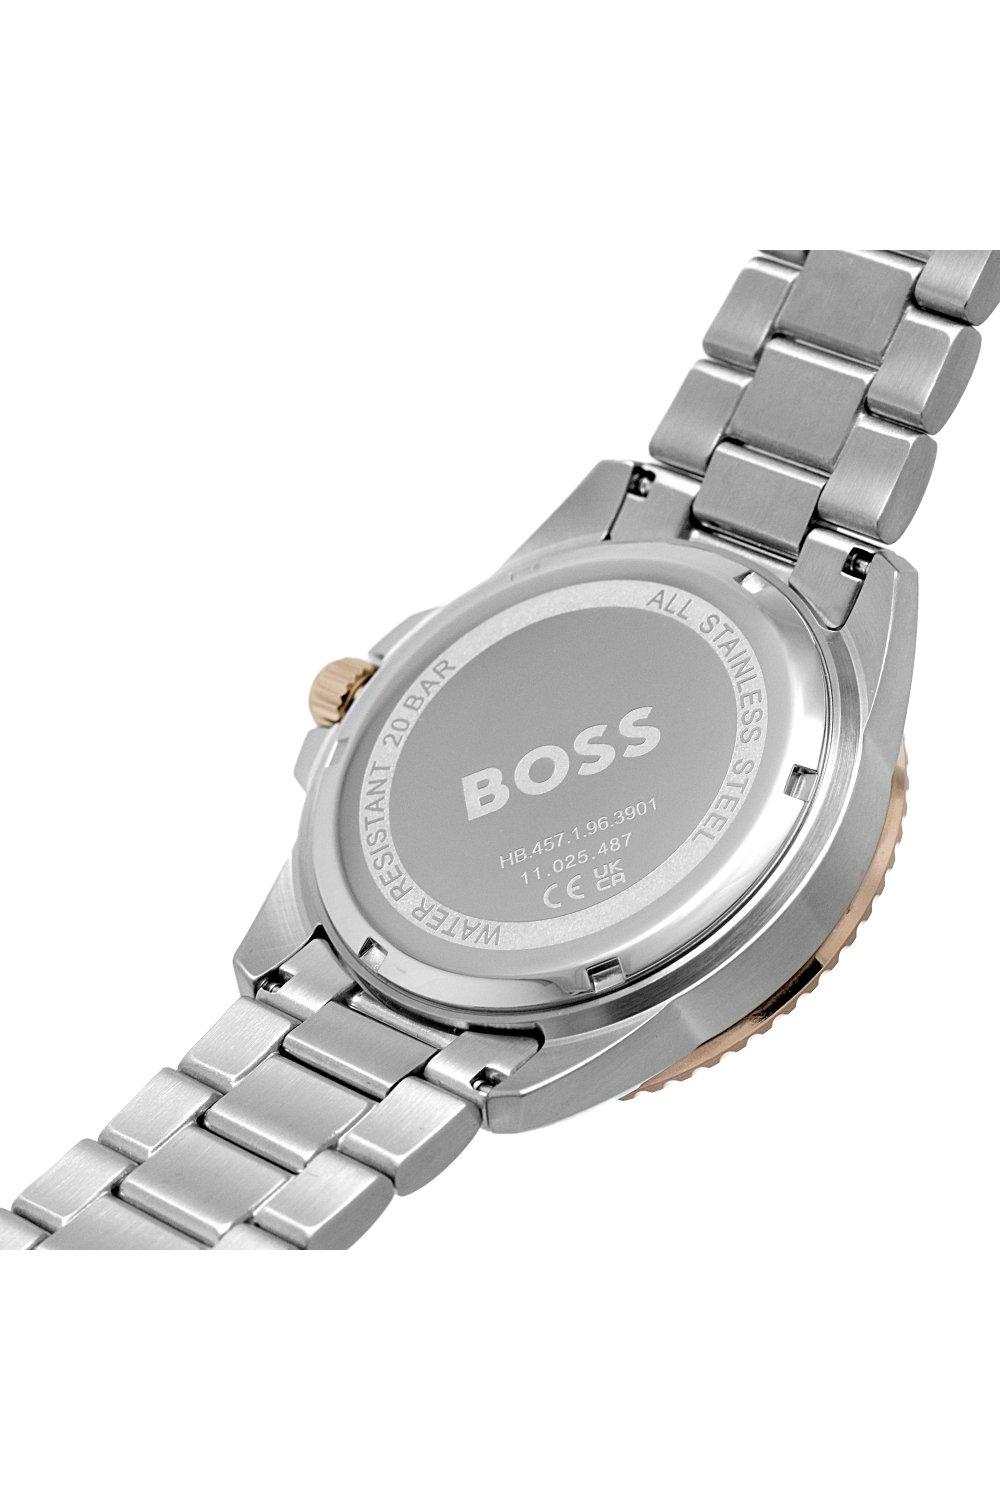 | Quartz - Fashion BOSS Steel Watches Ace 1514012 Stainless | Watch Analogue